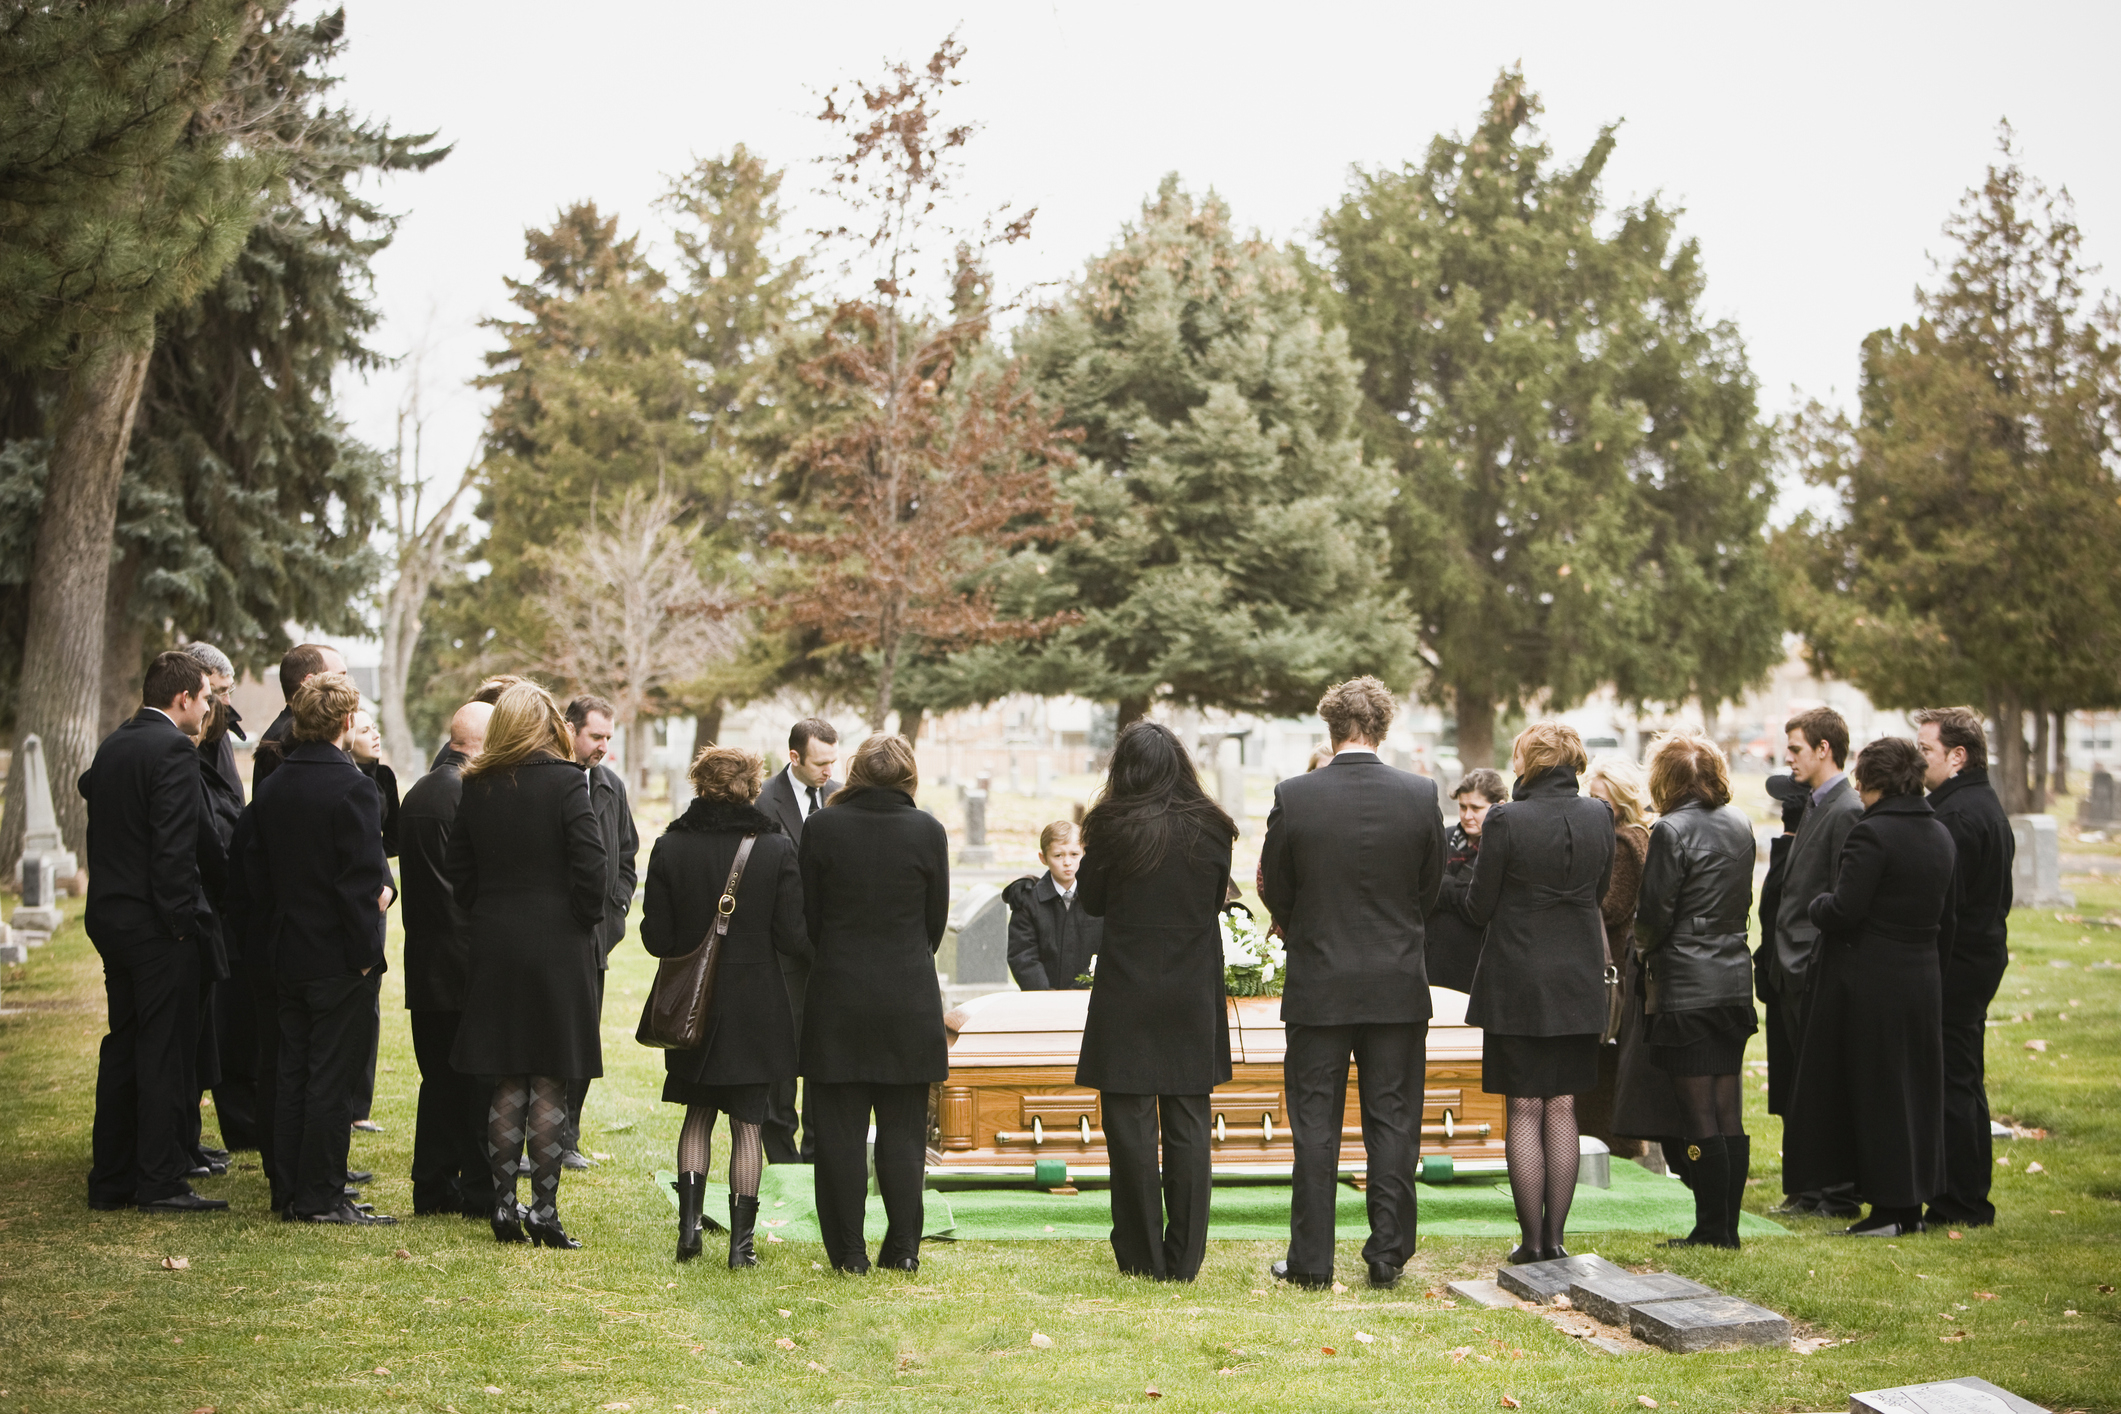 People at a funeral